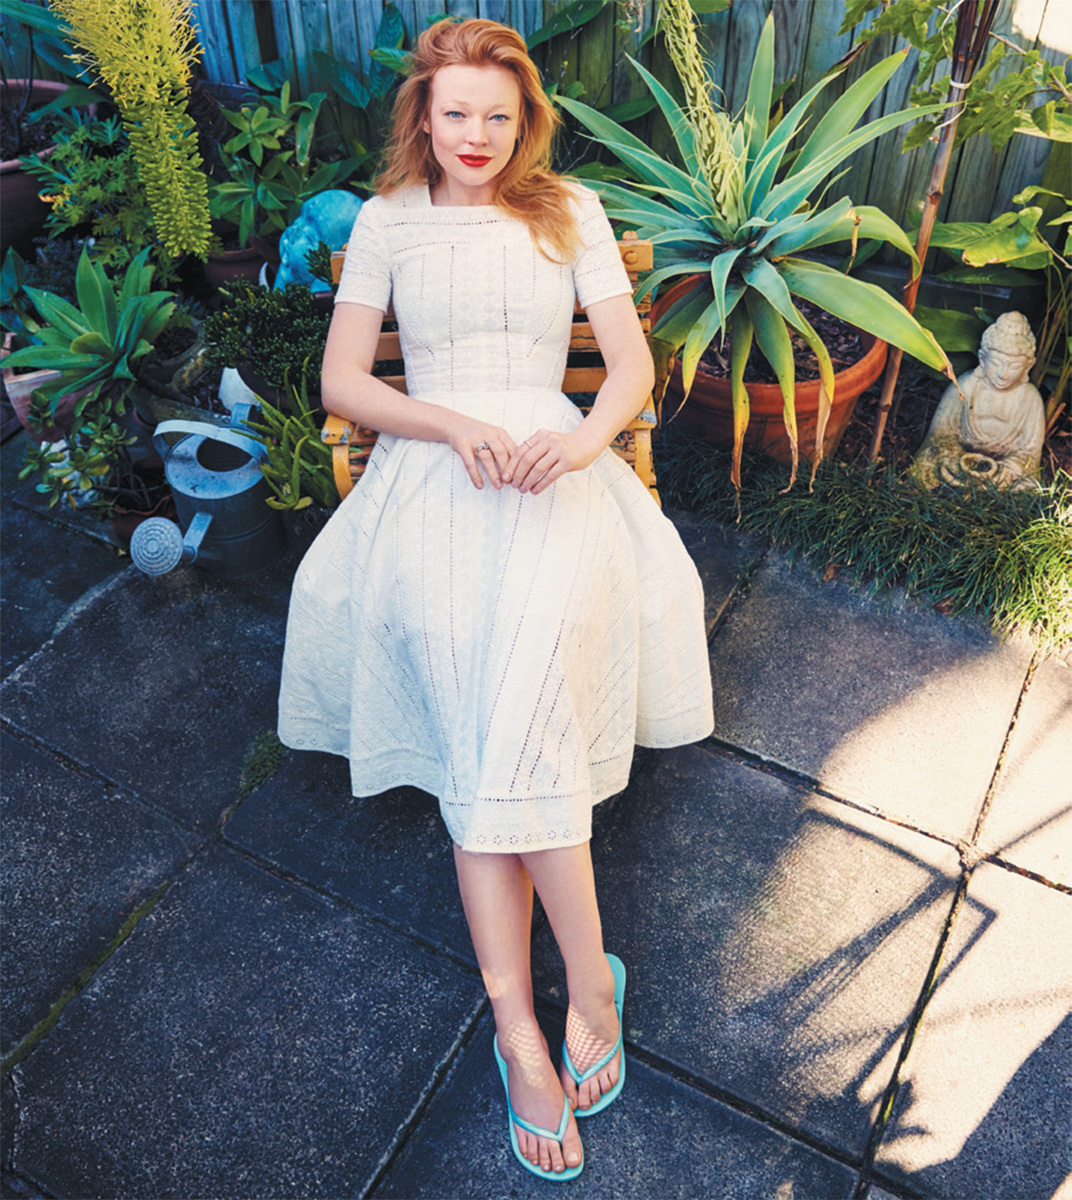 People who liked Sarah Snook's feet, also liked.